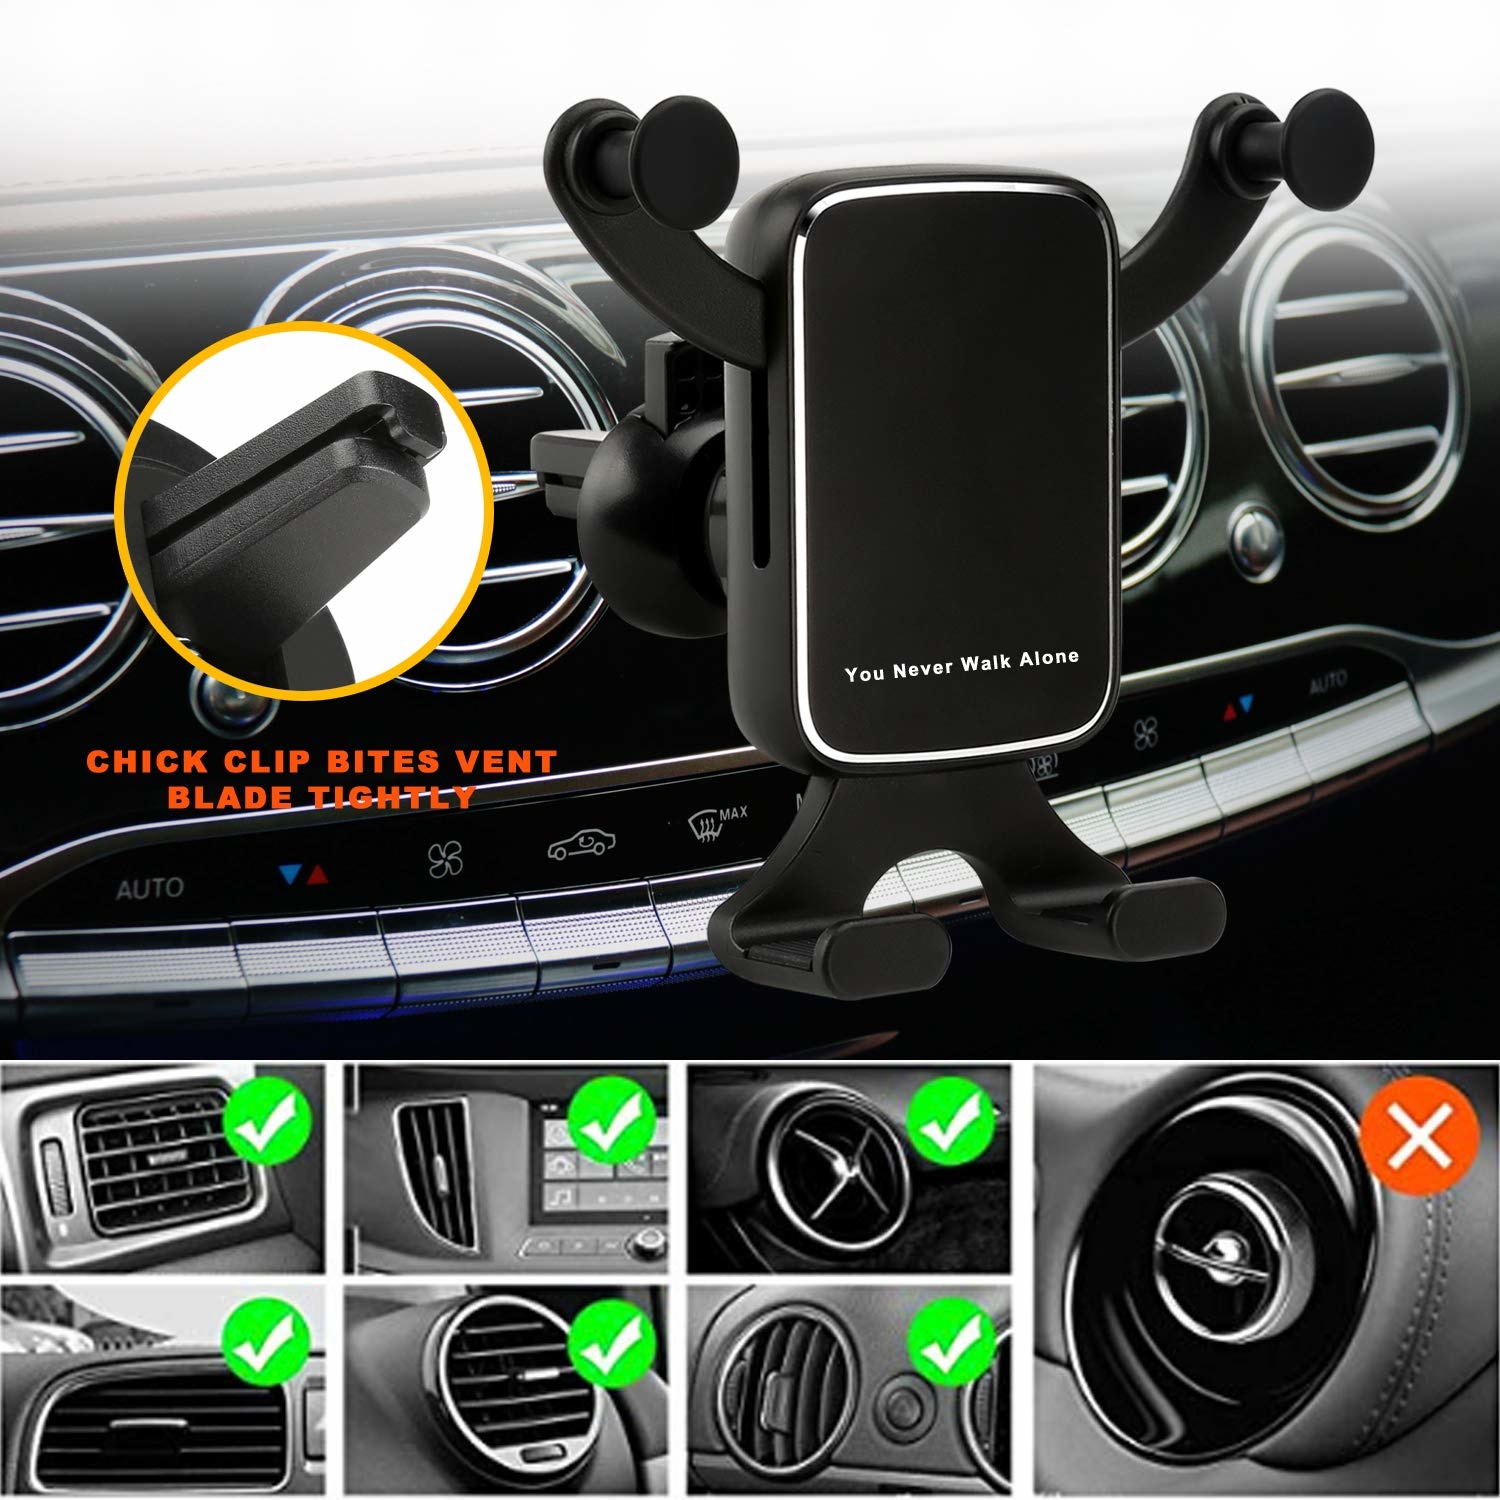 Cell Phone Holder for Car, Qelebet Gravity Auto Clamping Air Vent Car Phone  Mount Holder Compatible with iPhone Xs MAX/XS/X/8/7/6/Plus, Samsung  S9/S8/S7/Plus, LG, HTC and More(Black) - NWCA Inc.